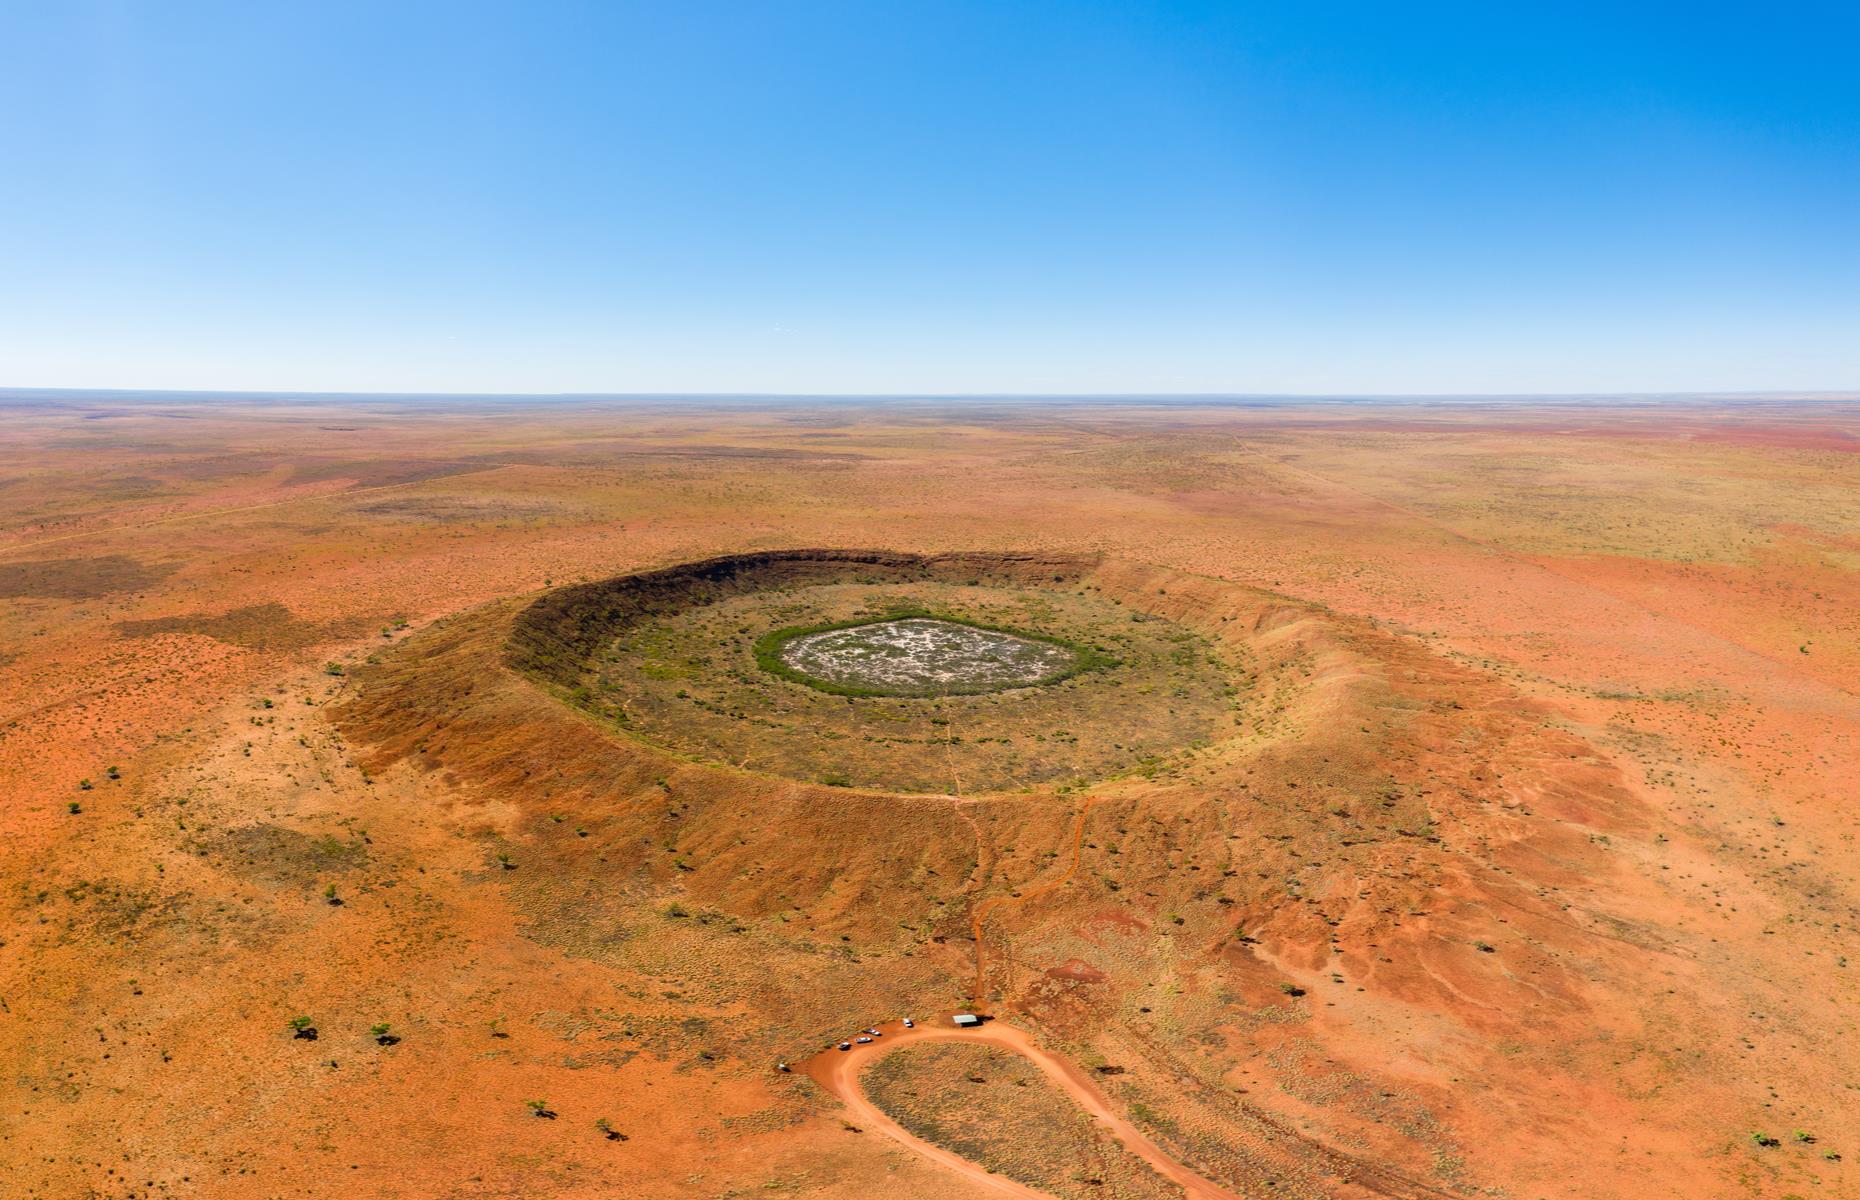 <p>Pretty much perfectly circular, this gaping hole is the second largest crater in the world where fragments of a meteorite have been collected. Lying south of remote settlement Halls Creek in the Great Sandy Desert, the explosion crater has a diameter of 2,887 feet (880m) and is 197 feet (60m) deep. Thought to have been created around 300,000 years ago, the crater has been well preserved because of its desert setting. You can walk around its rim or take an aerial tour from Halls Creek for the most dramatic views. </p>  <p><a href="https://www.loveexploring.com/galleries/135993/abandoned-australia-101-spinetingling-places-you-wont-want-to-visit?page=1"><strong>Abandoned Australia: 101 spine-tingling places you won't want to visit</strong></a></p>